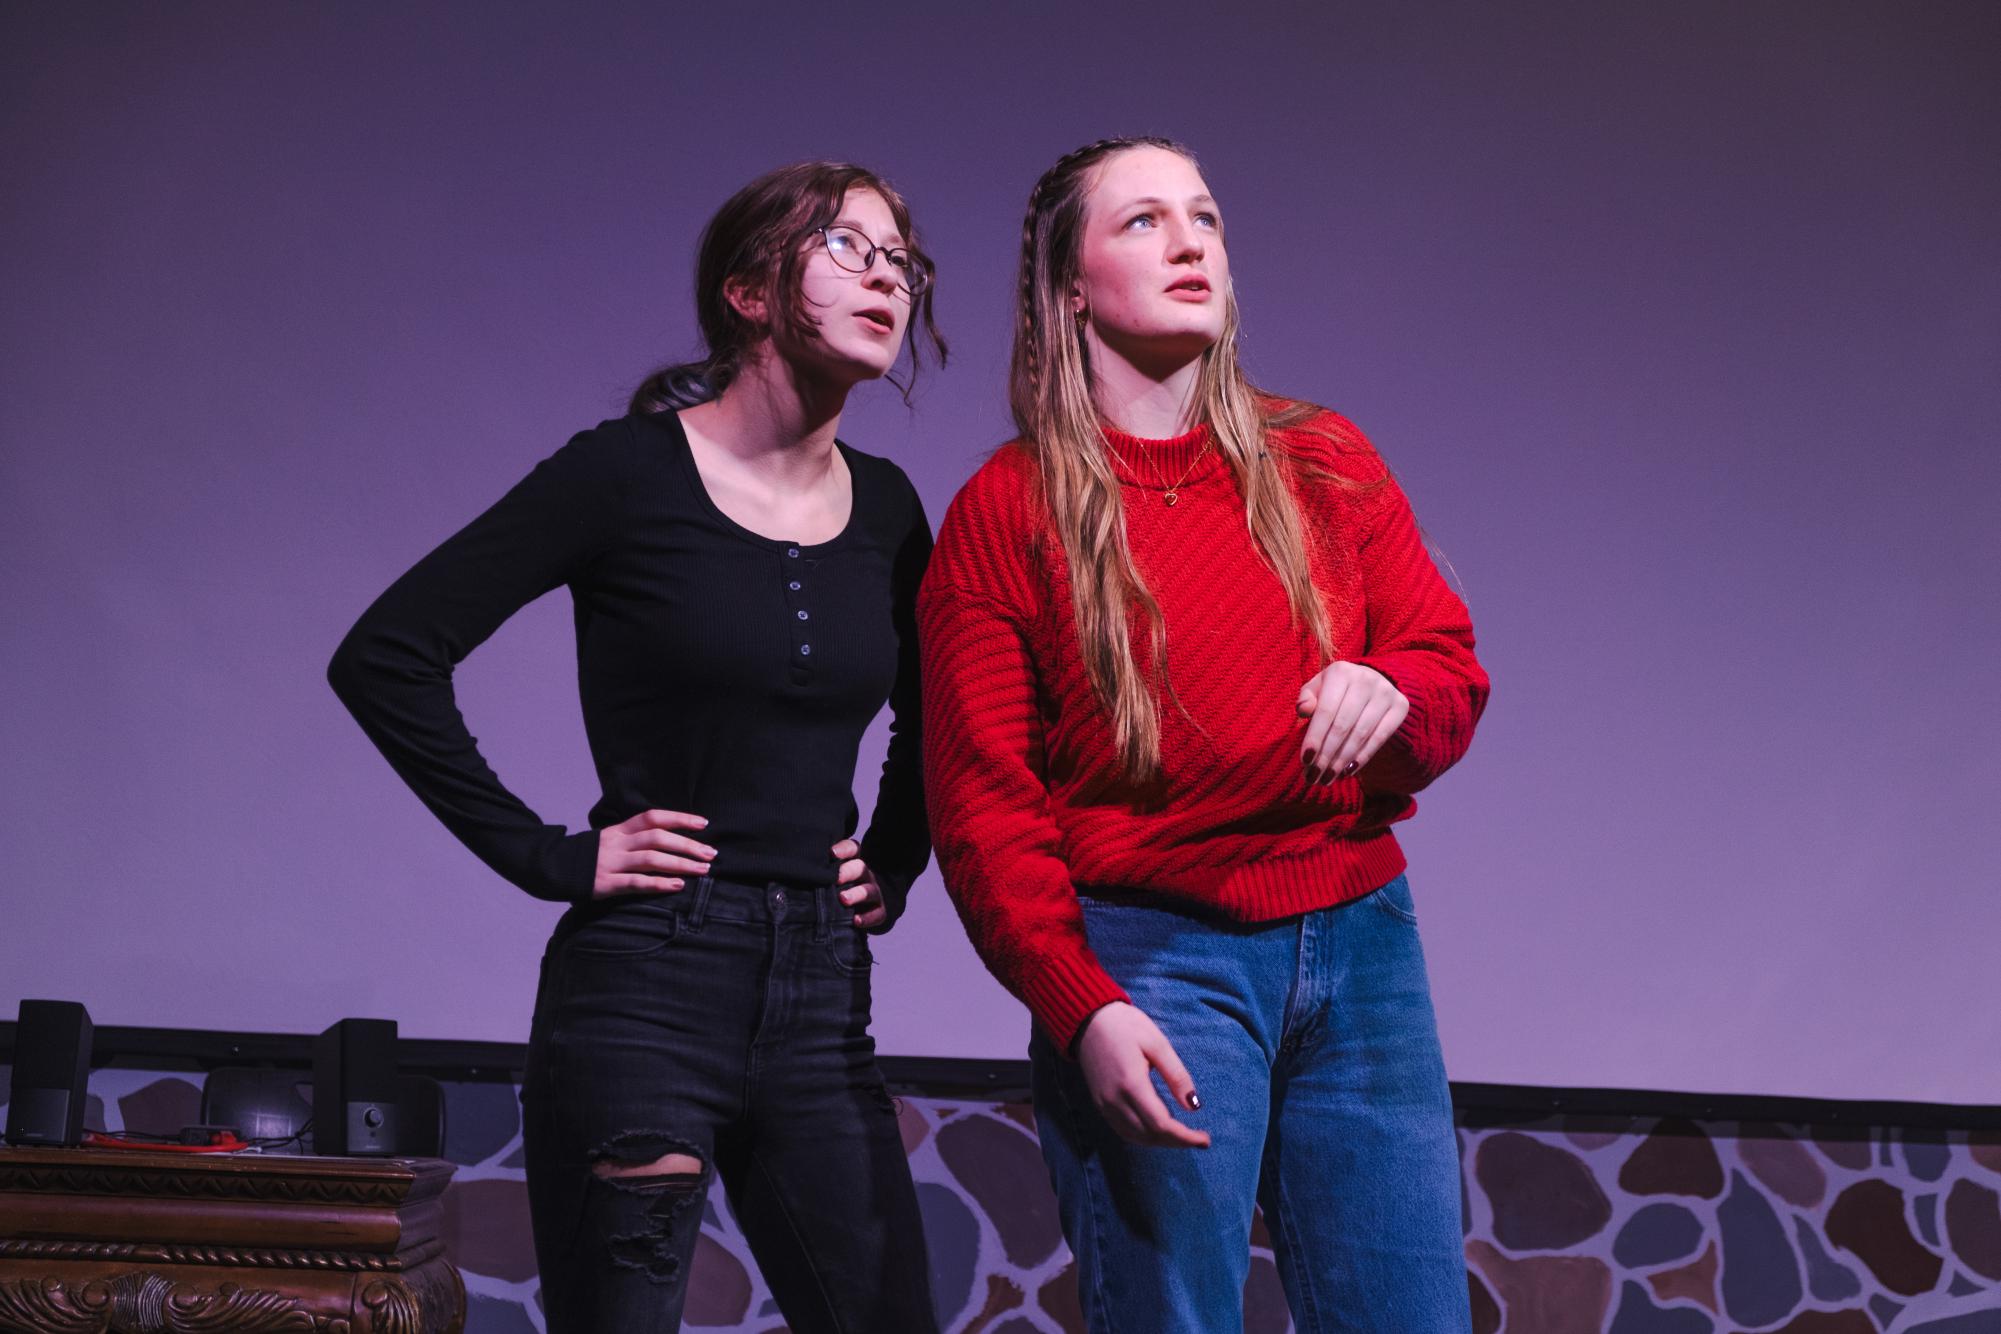 At the Kansas Thespian Festival Showcase, seniors Natalie Riley and Liz Wyle improvise a conversation. The night before leaving for KTF the theater department held a showcase of the students who would be performing at the festival.